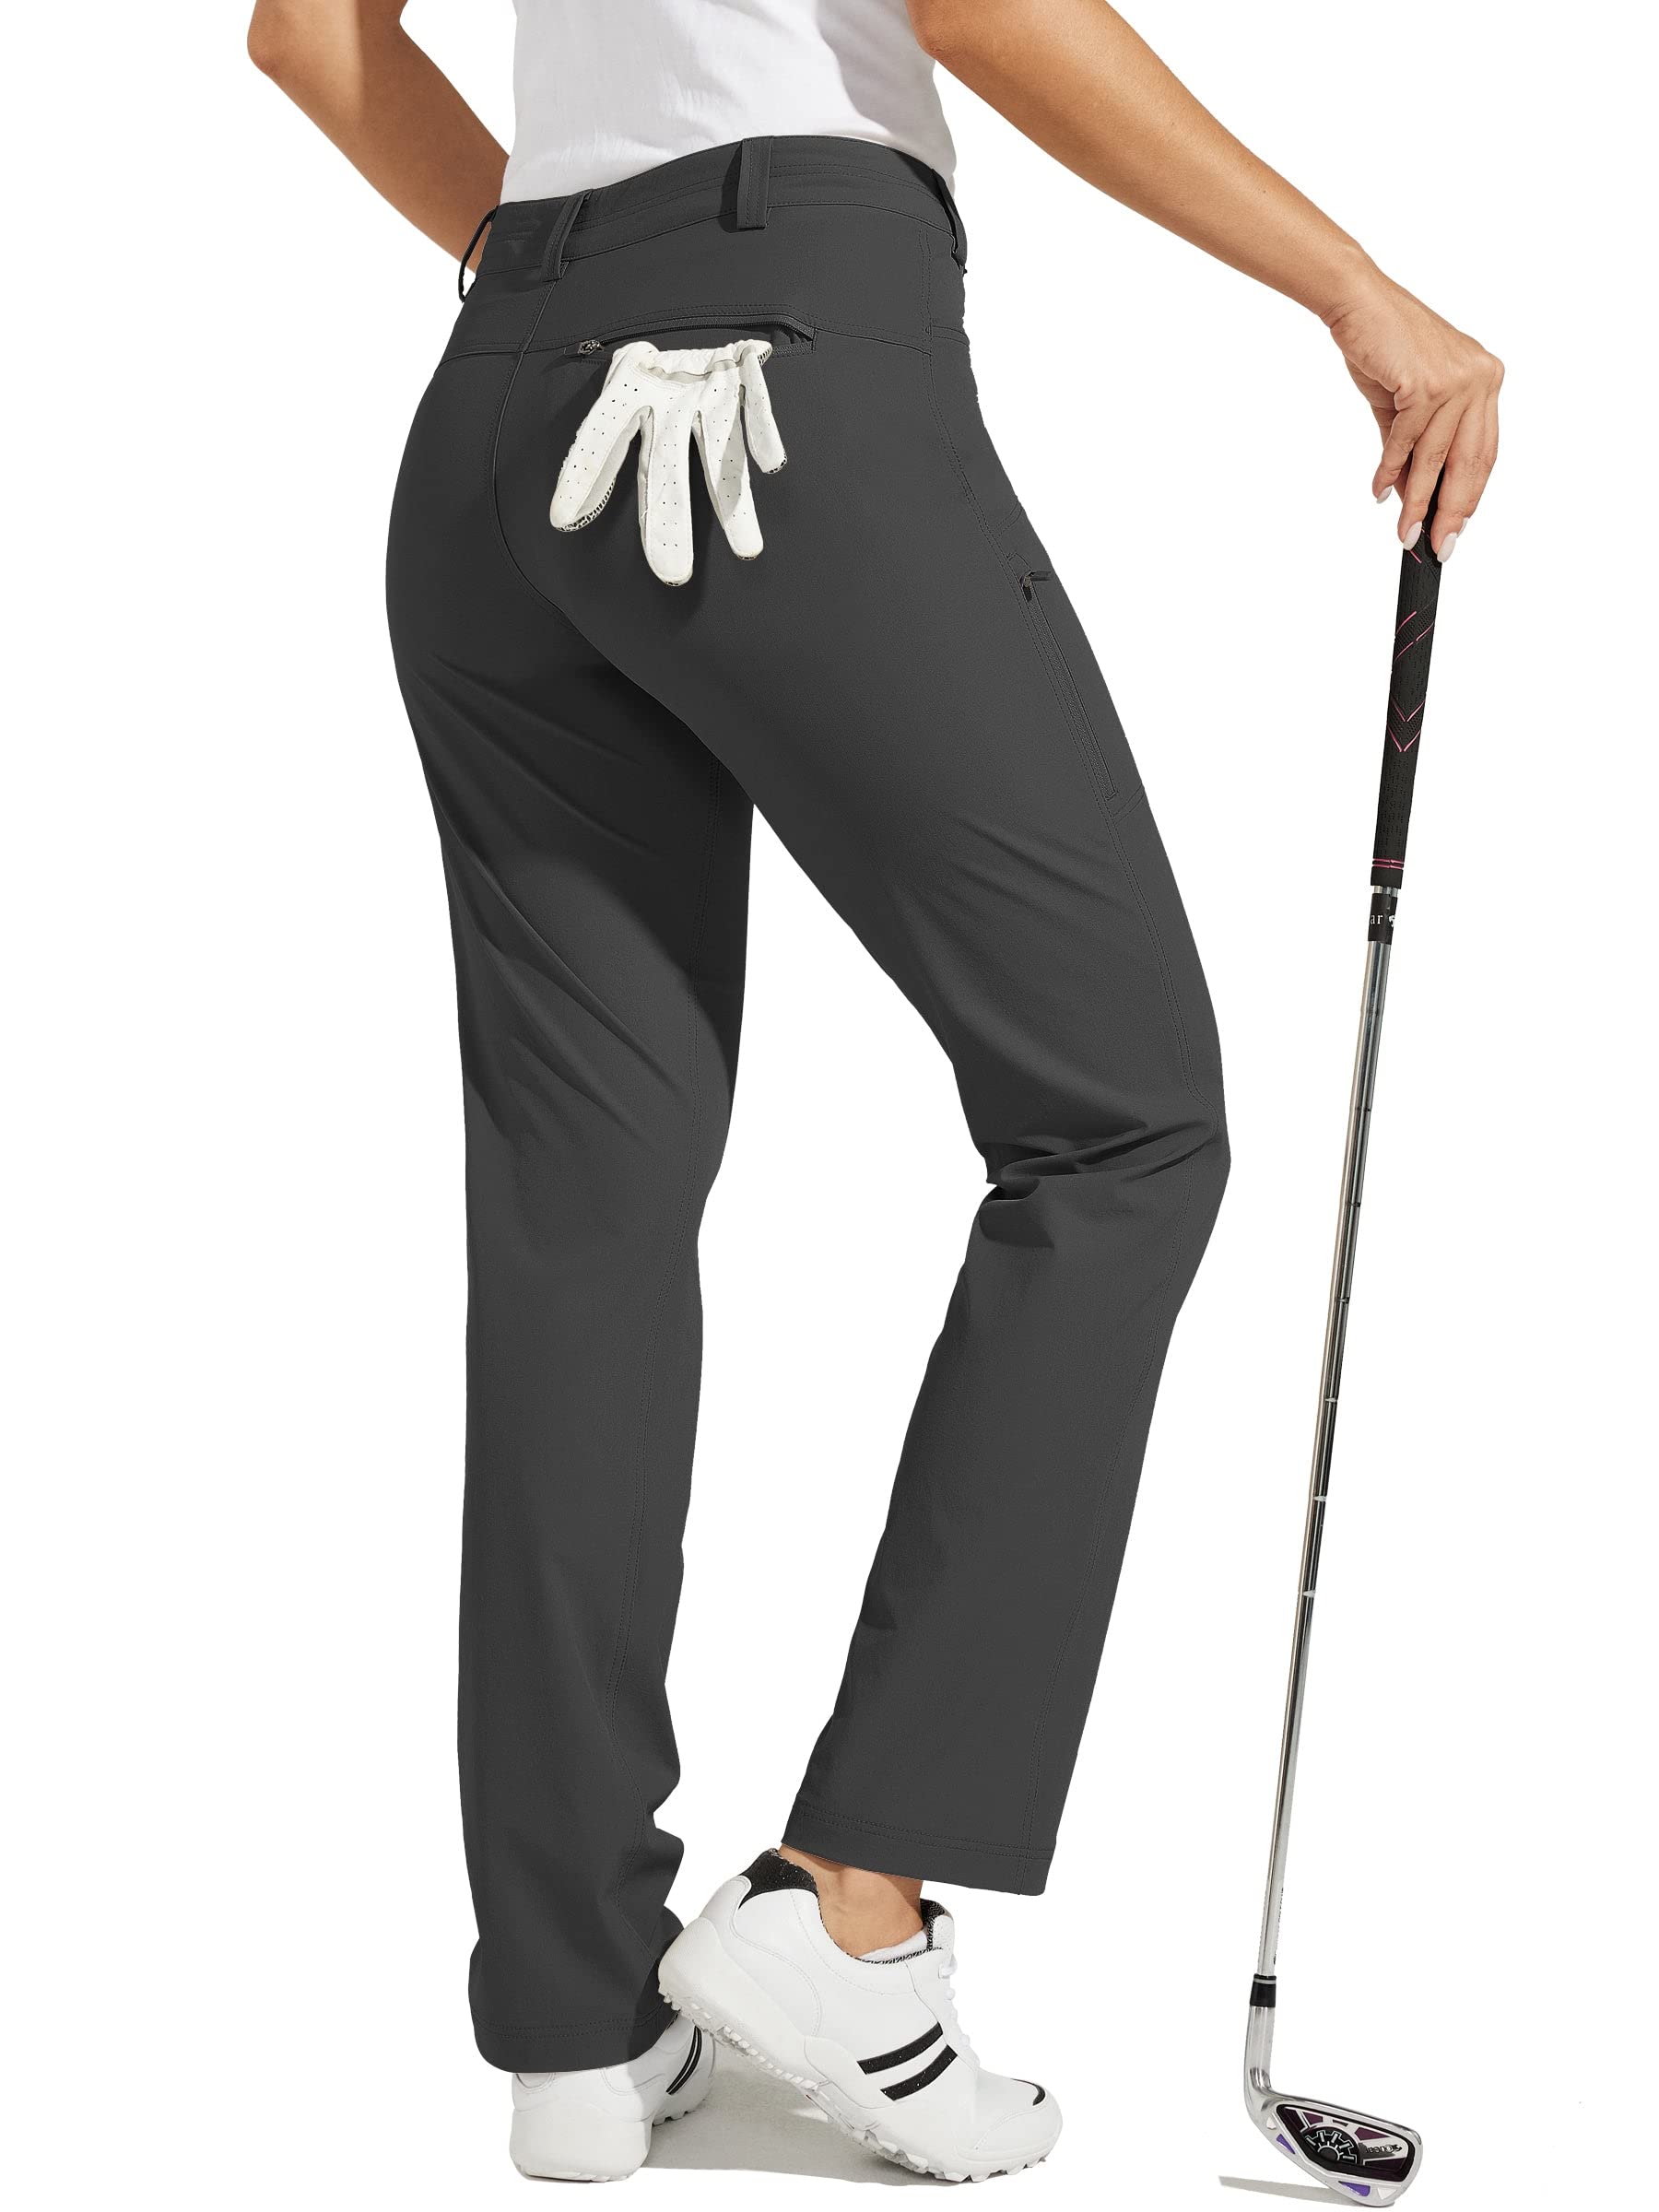 Willit Women's Golf Pants Stretch Hiking Pants Quick Dry